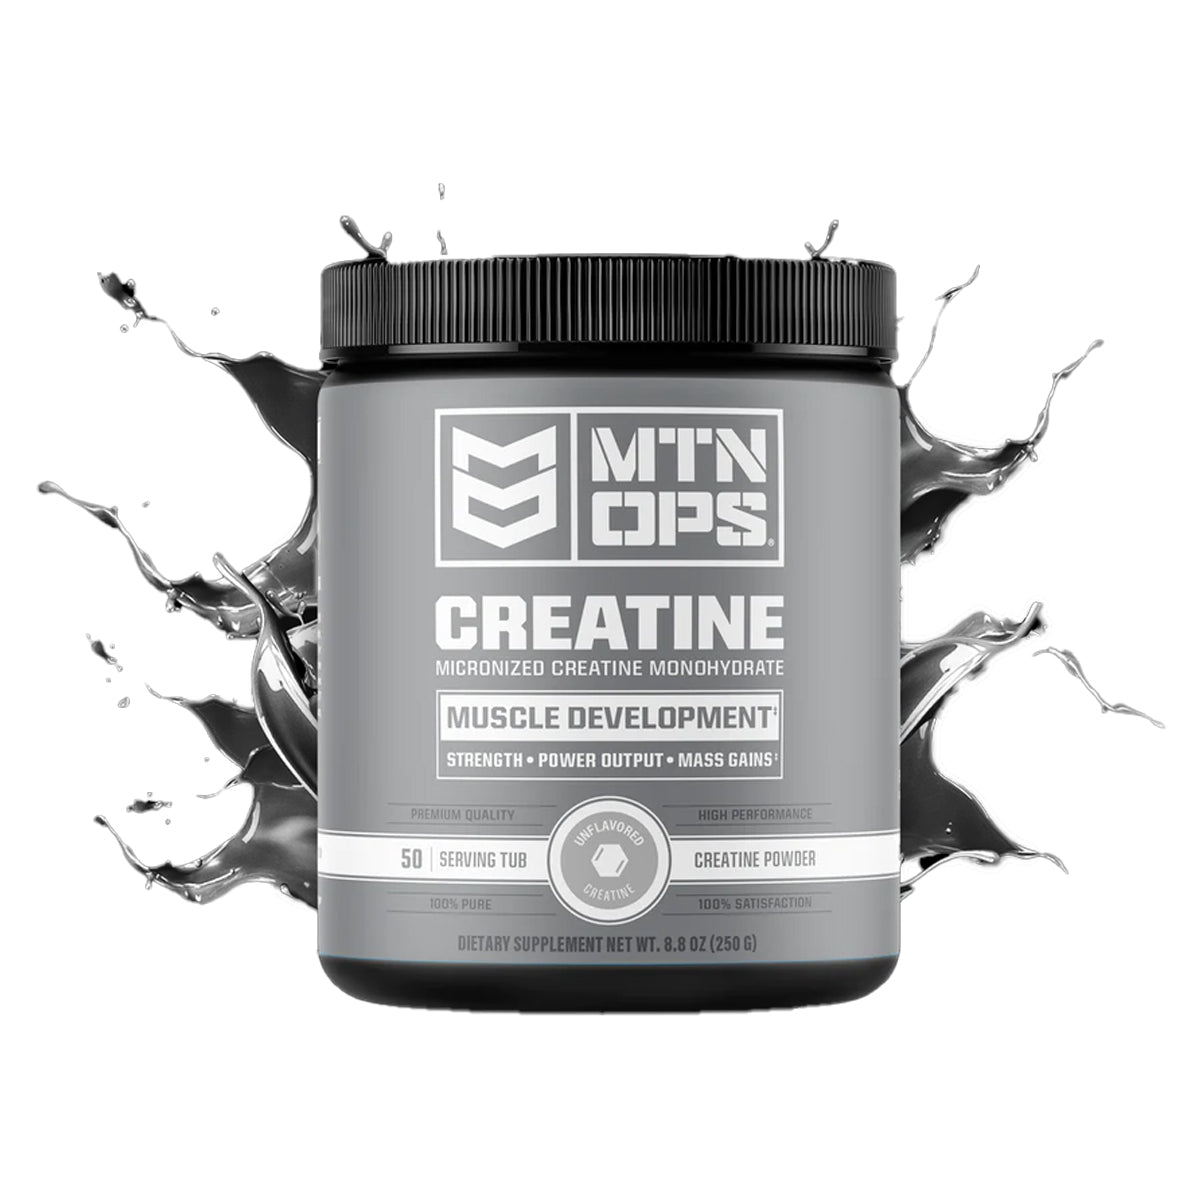 MTN OPS Creatine Monohydrate in  by GOHUNT | Mtn Ops - GOHUNT Shop